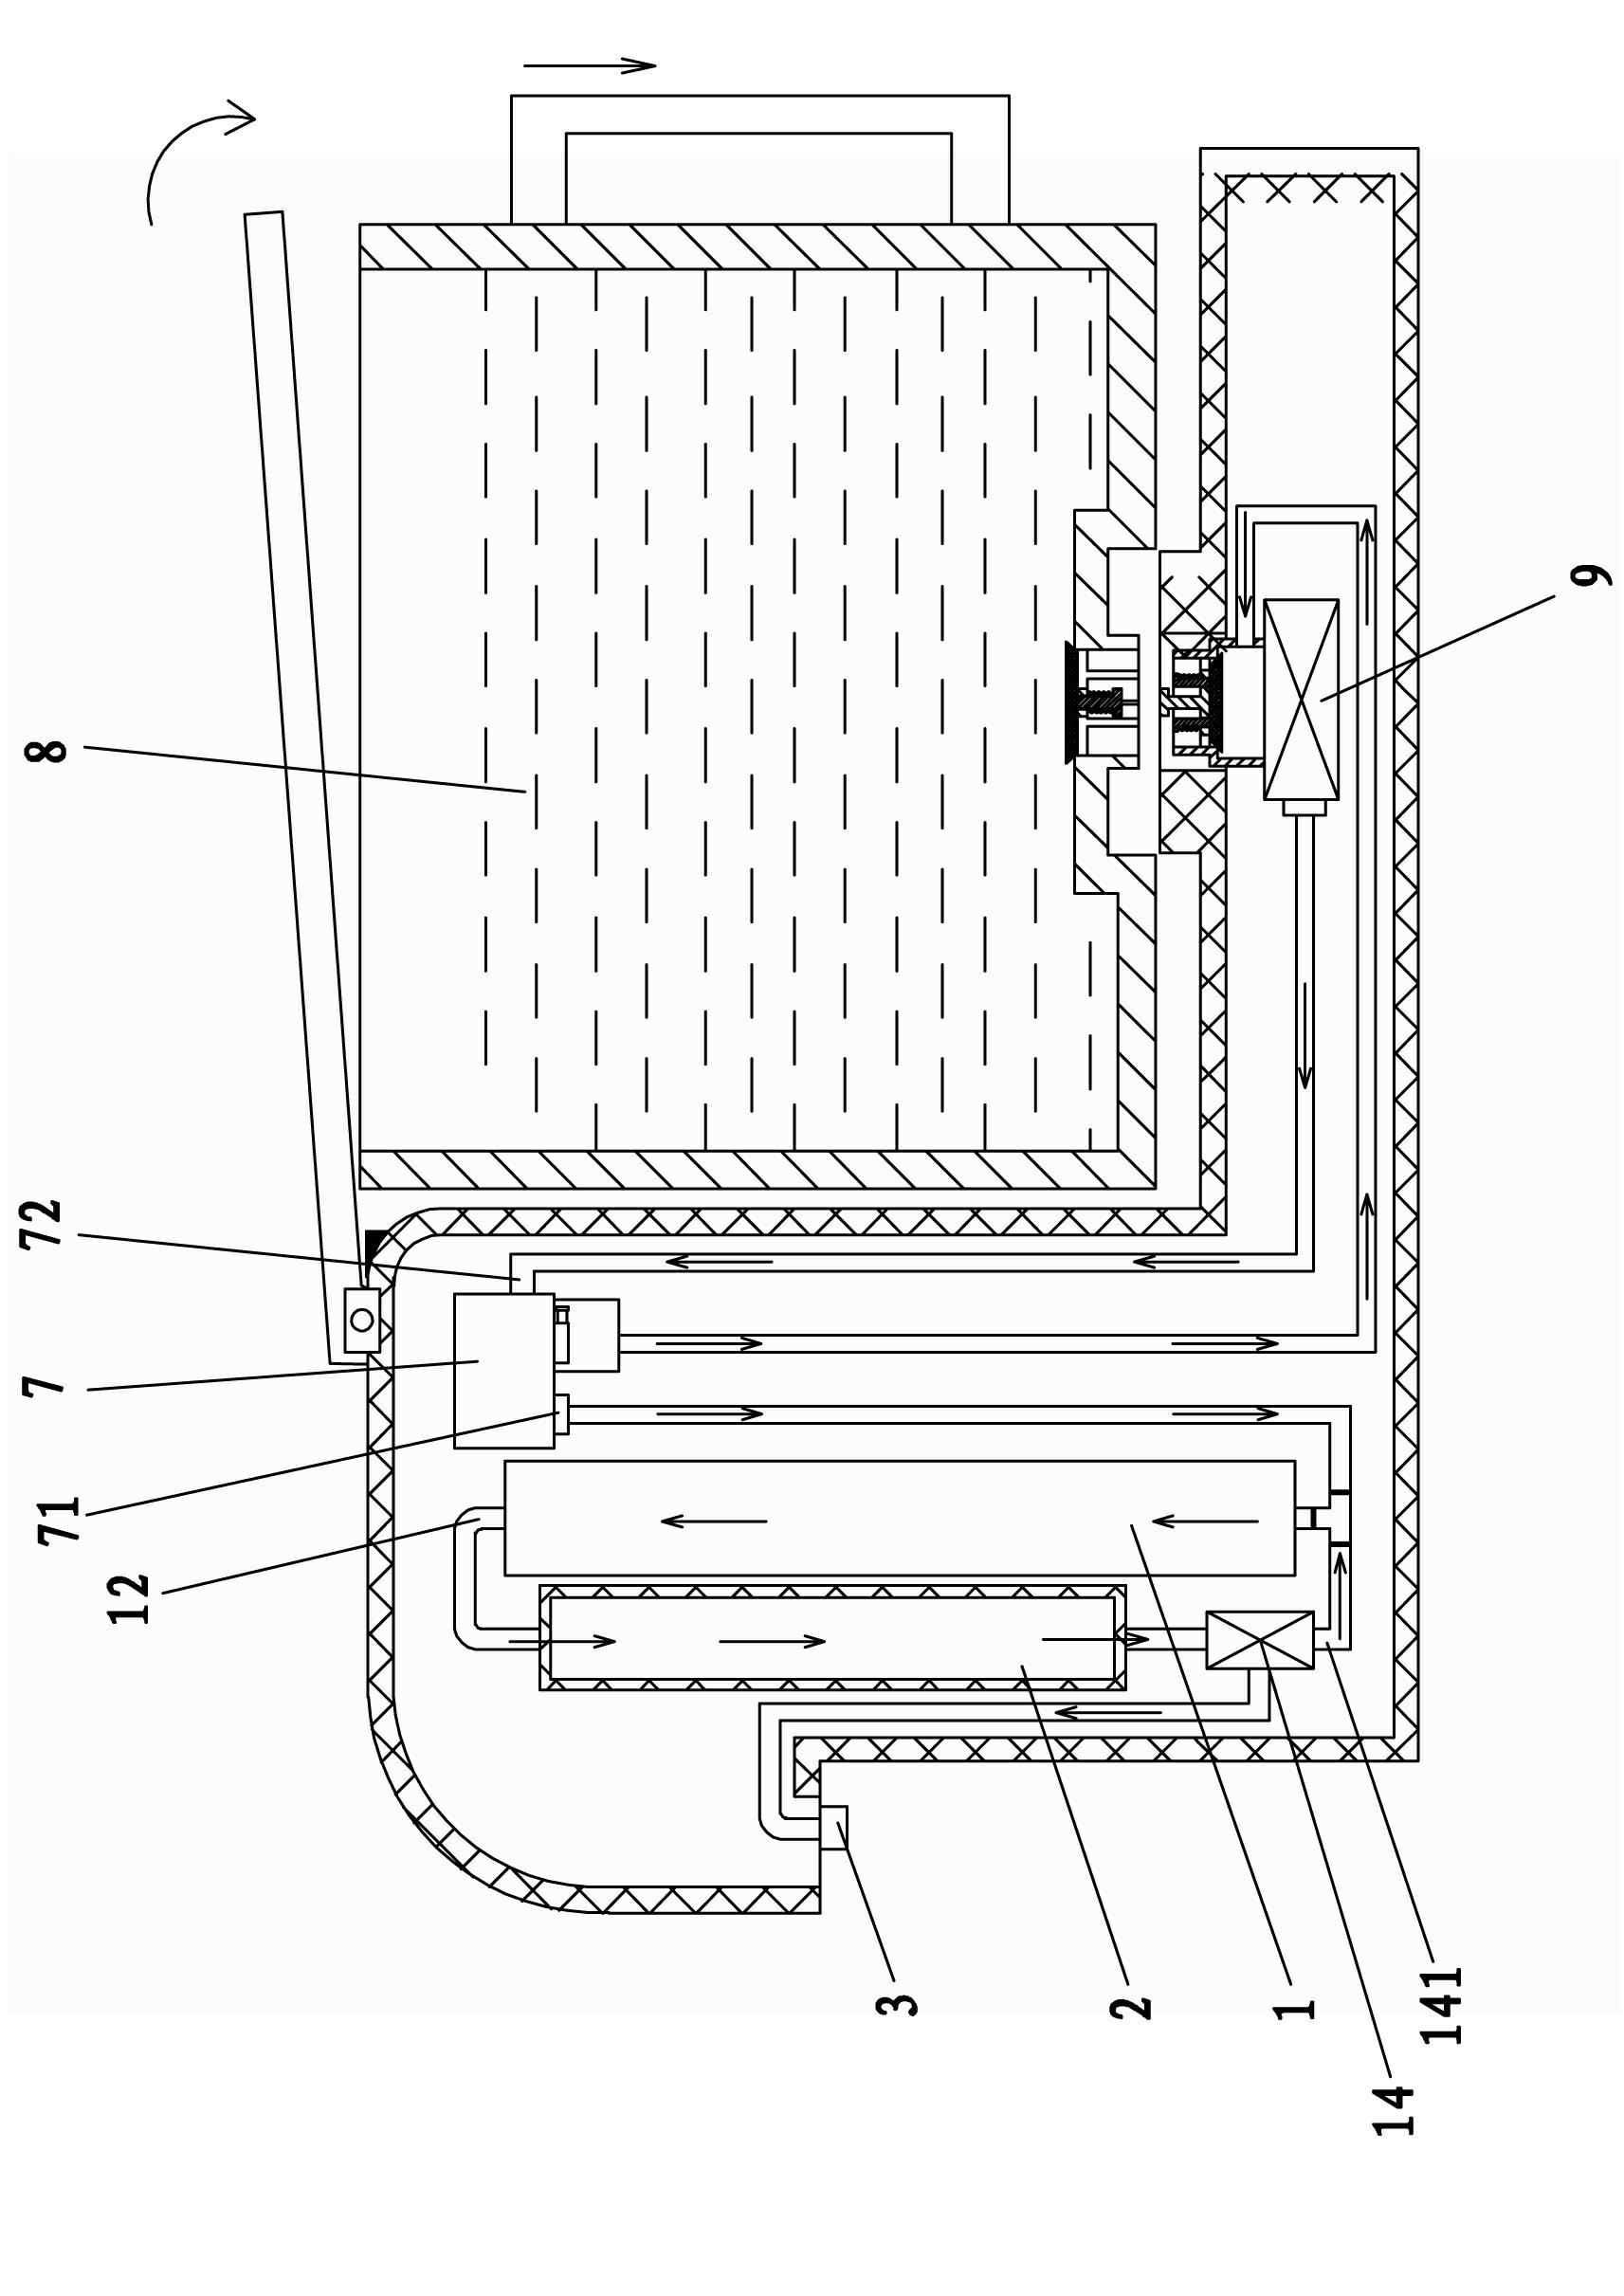 Drinking water heating device with water collecting tank